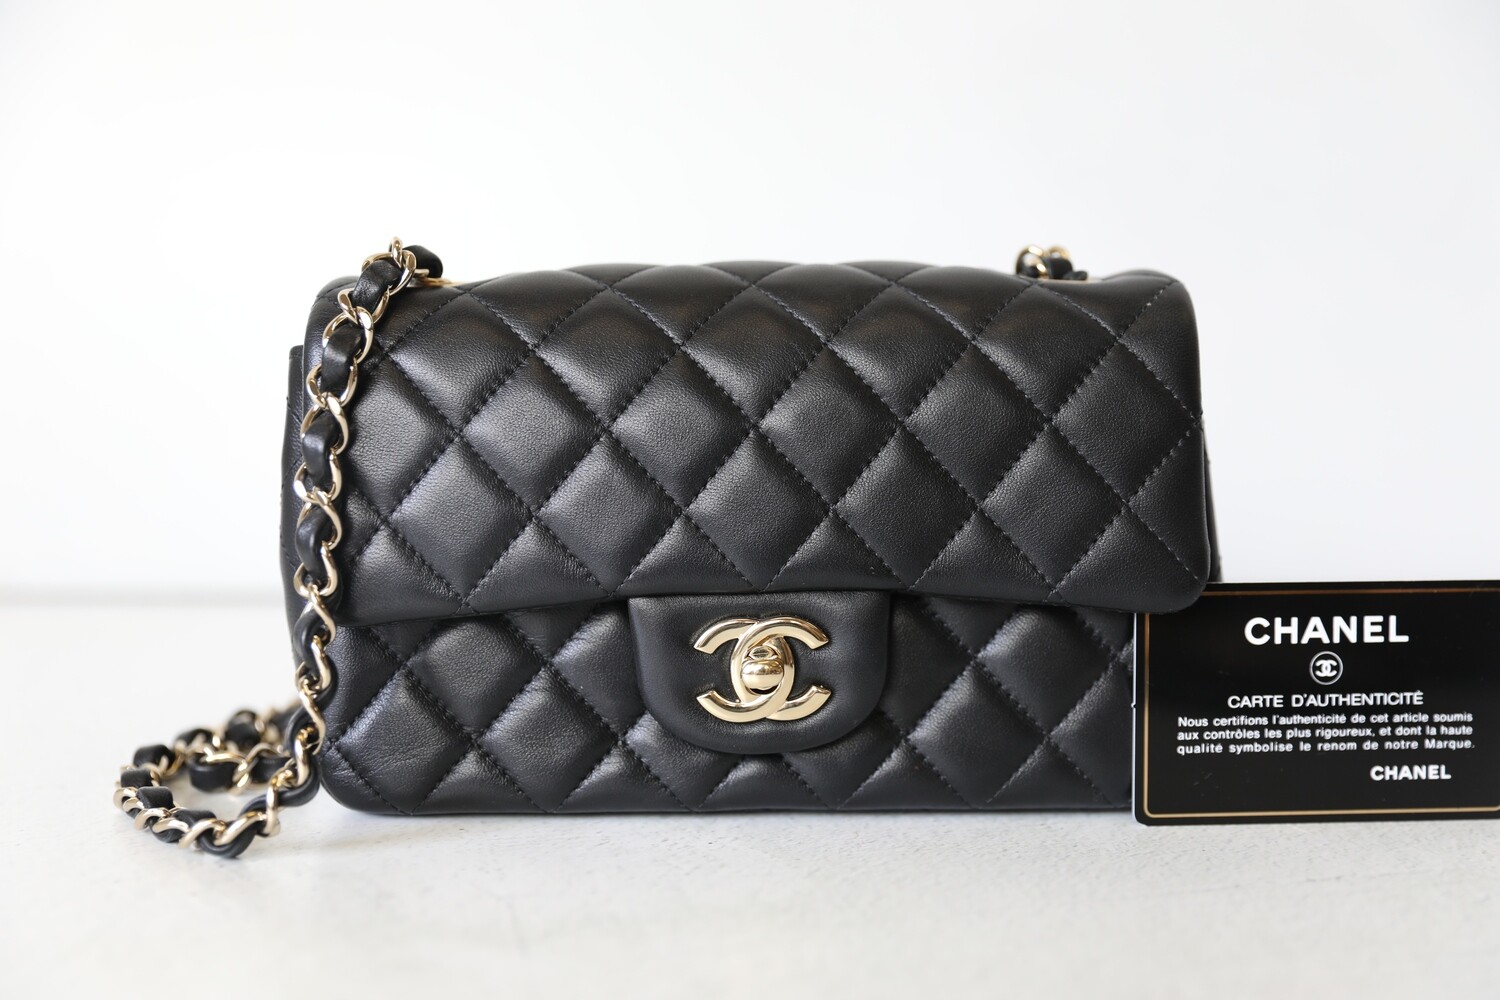 Chanel Mini Rectangular Flap with Top Handle Beige and Caramel Lambskin  Light Gold Hardware